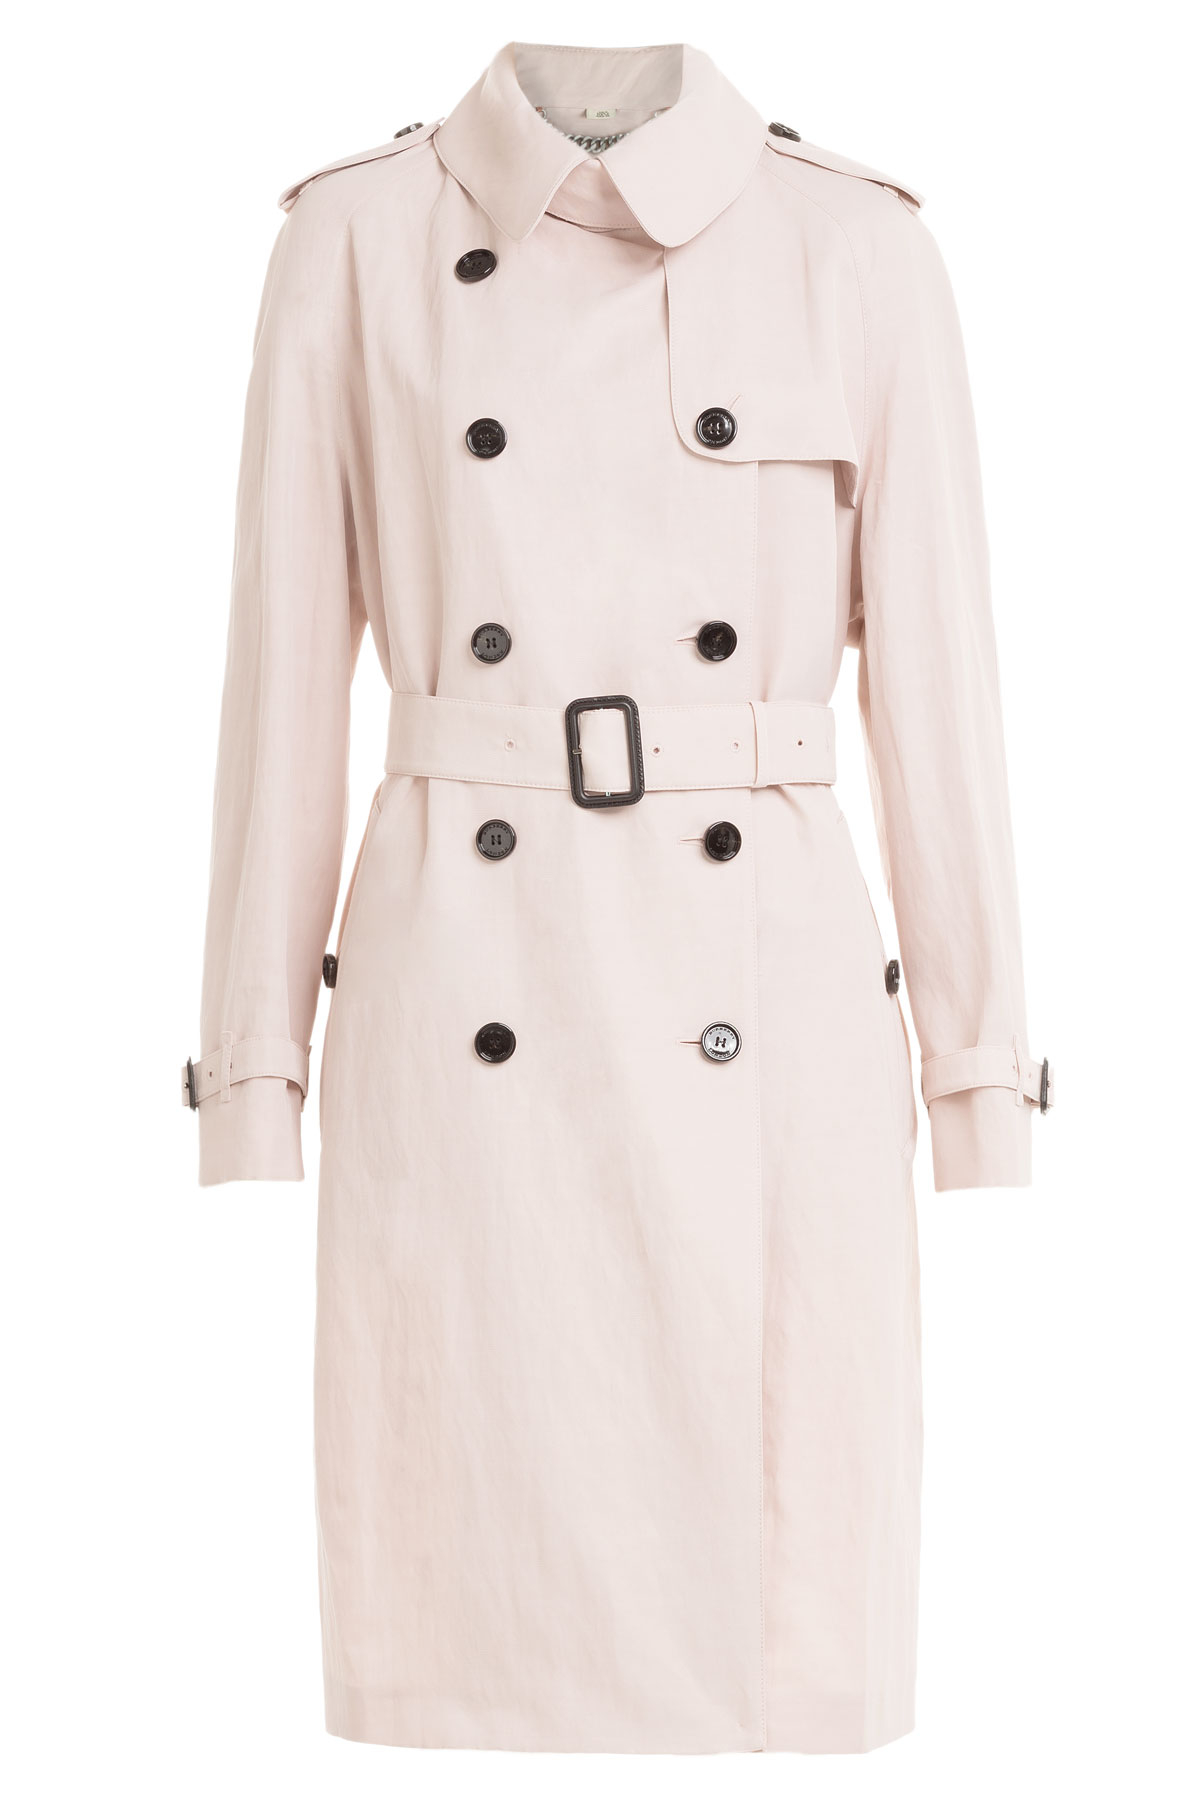 Lyst - Burberry Terrington Trench Coat - Rose in Pink